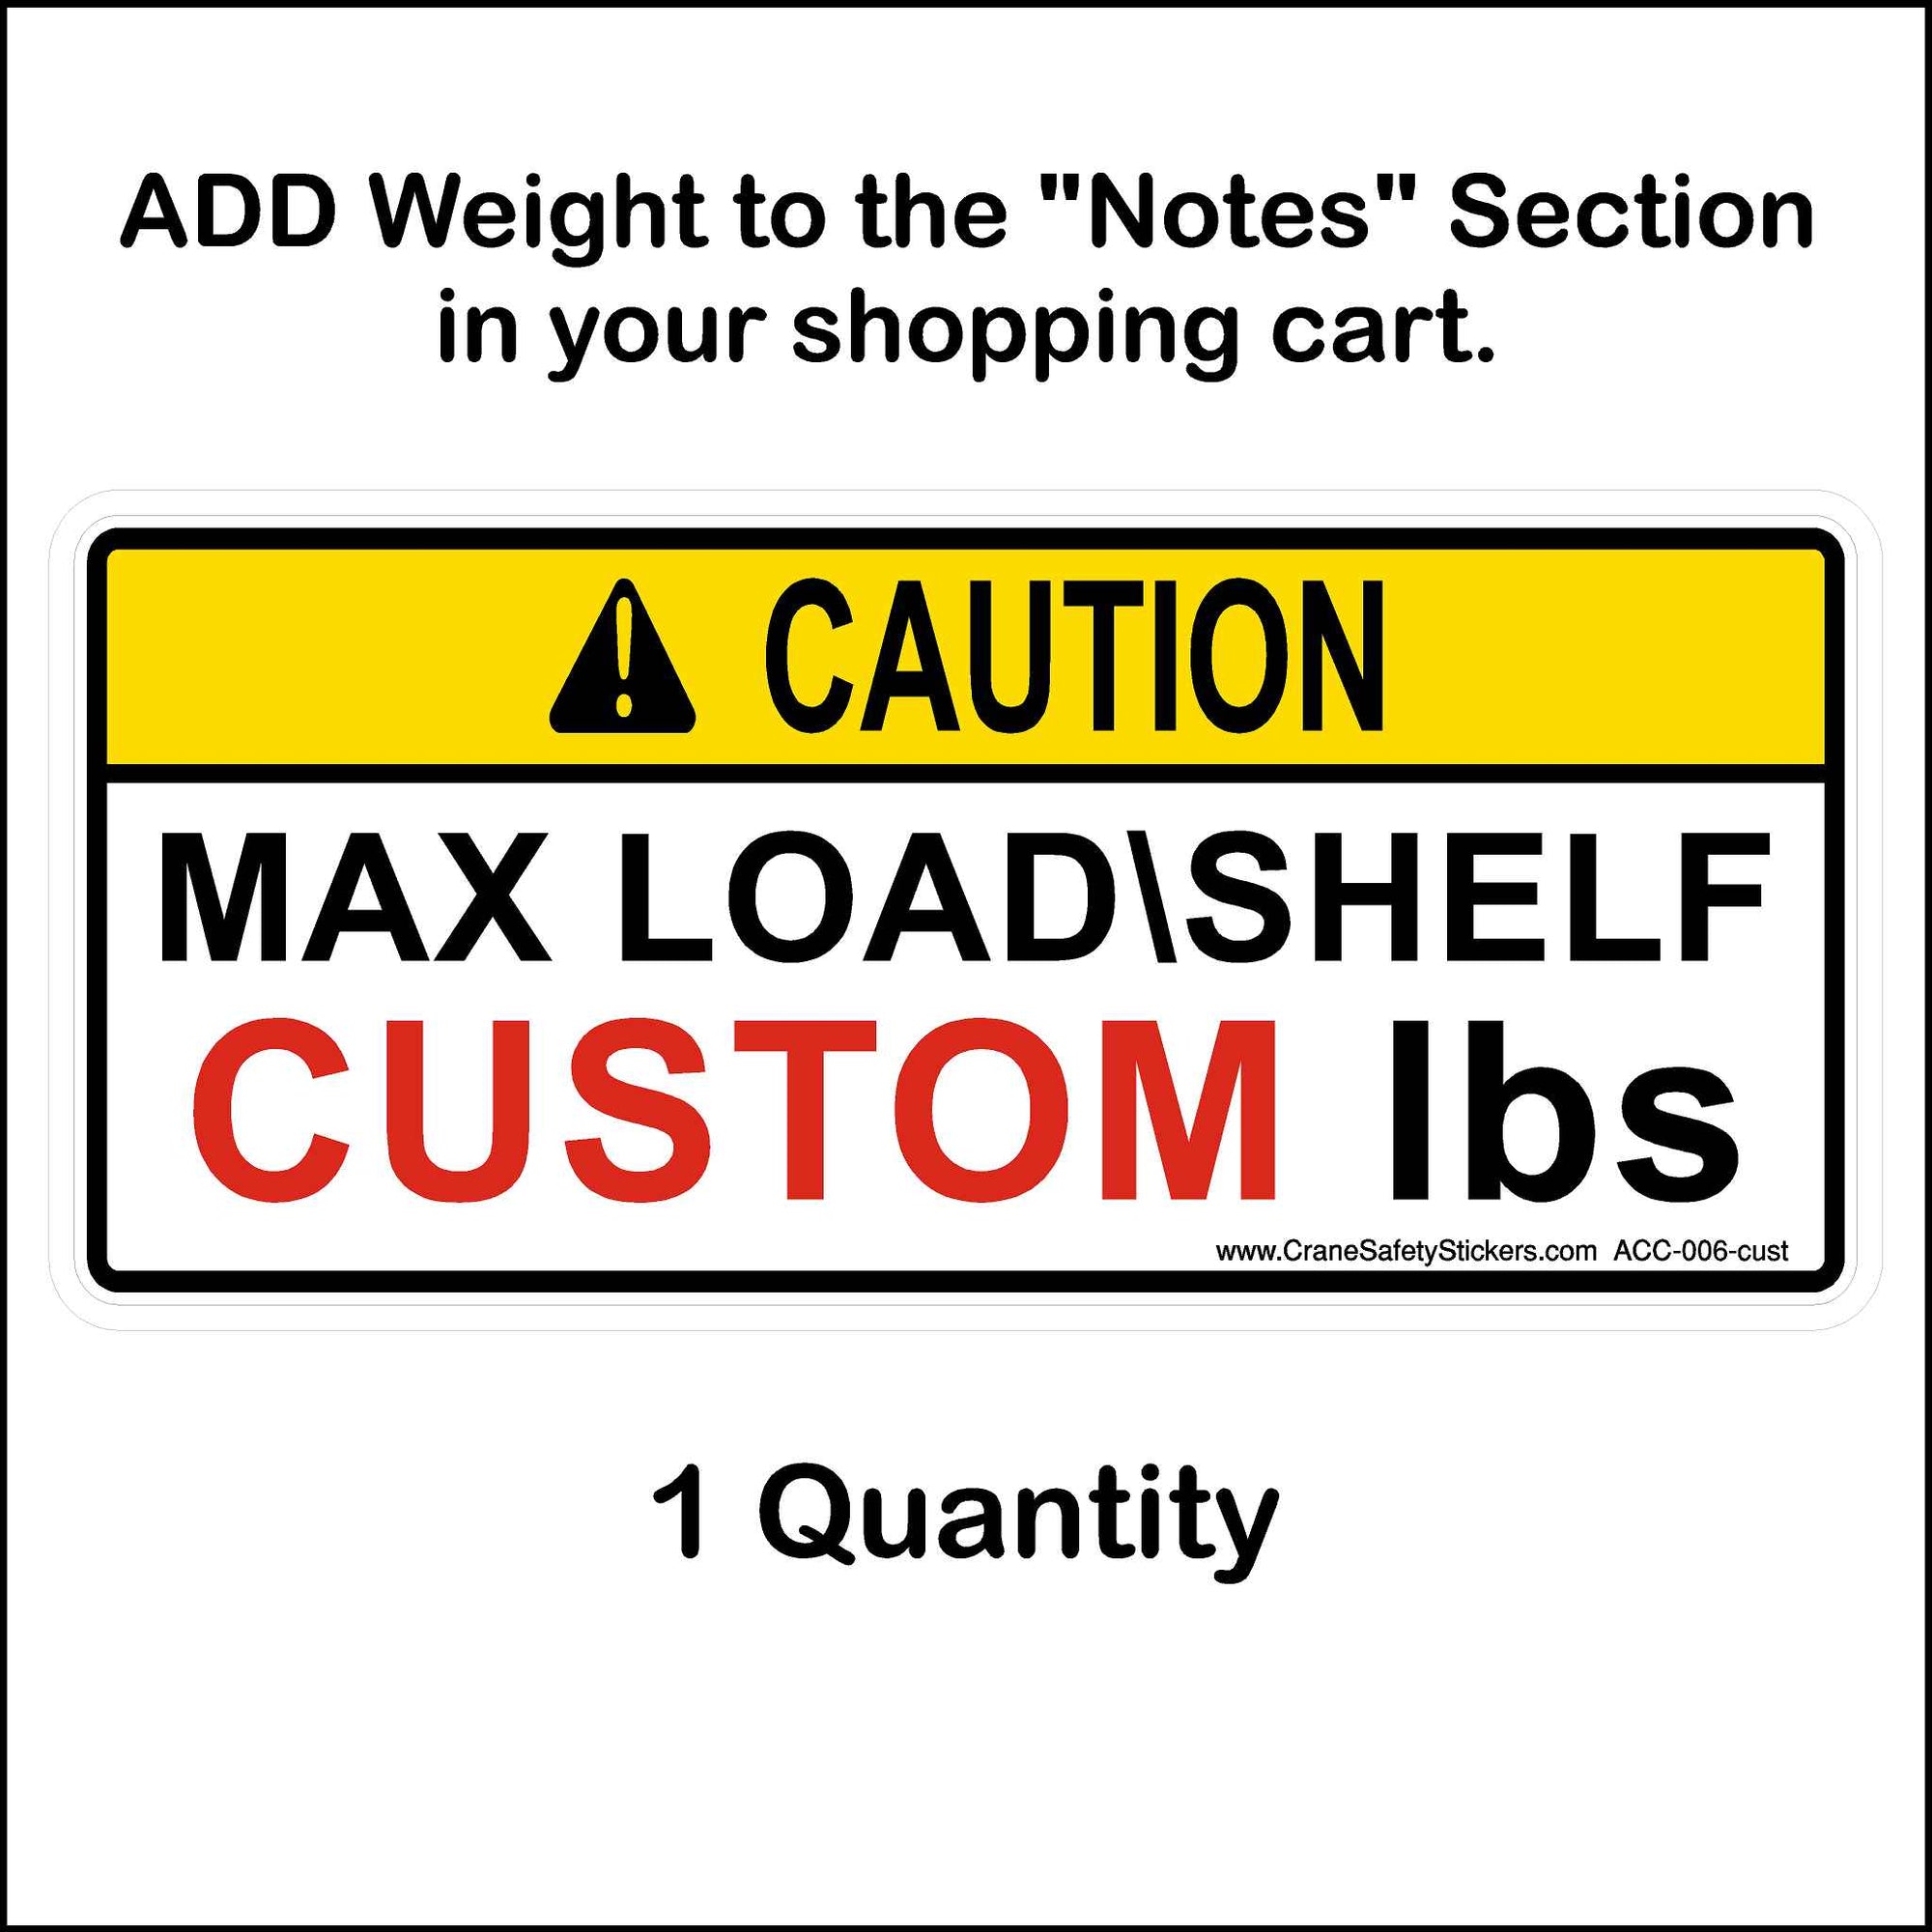 Custom Small Pallet Racking Sticker Printed with Caution Max Load Shelf.